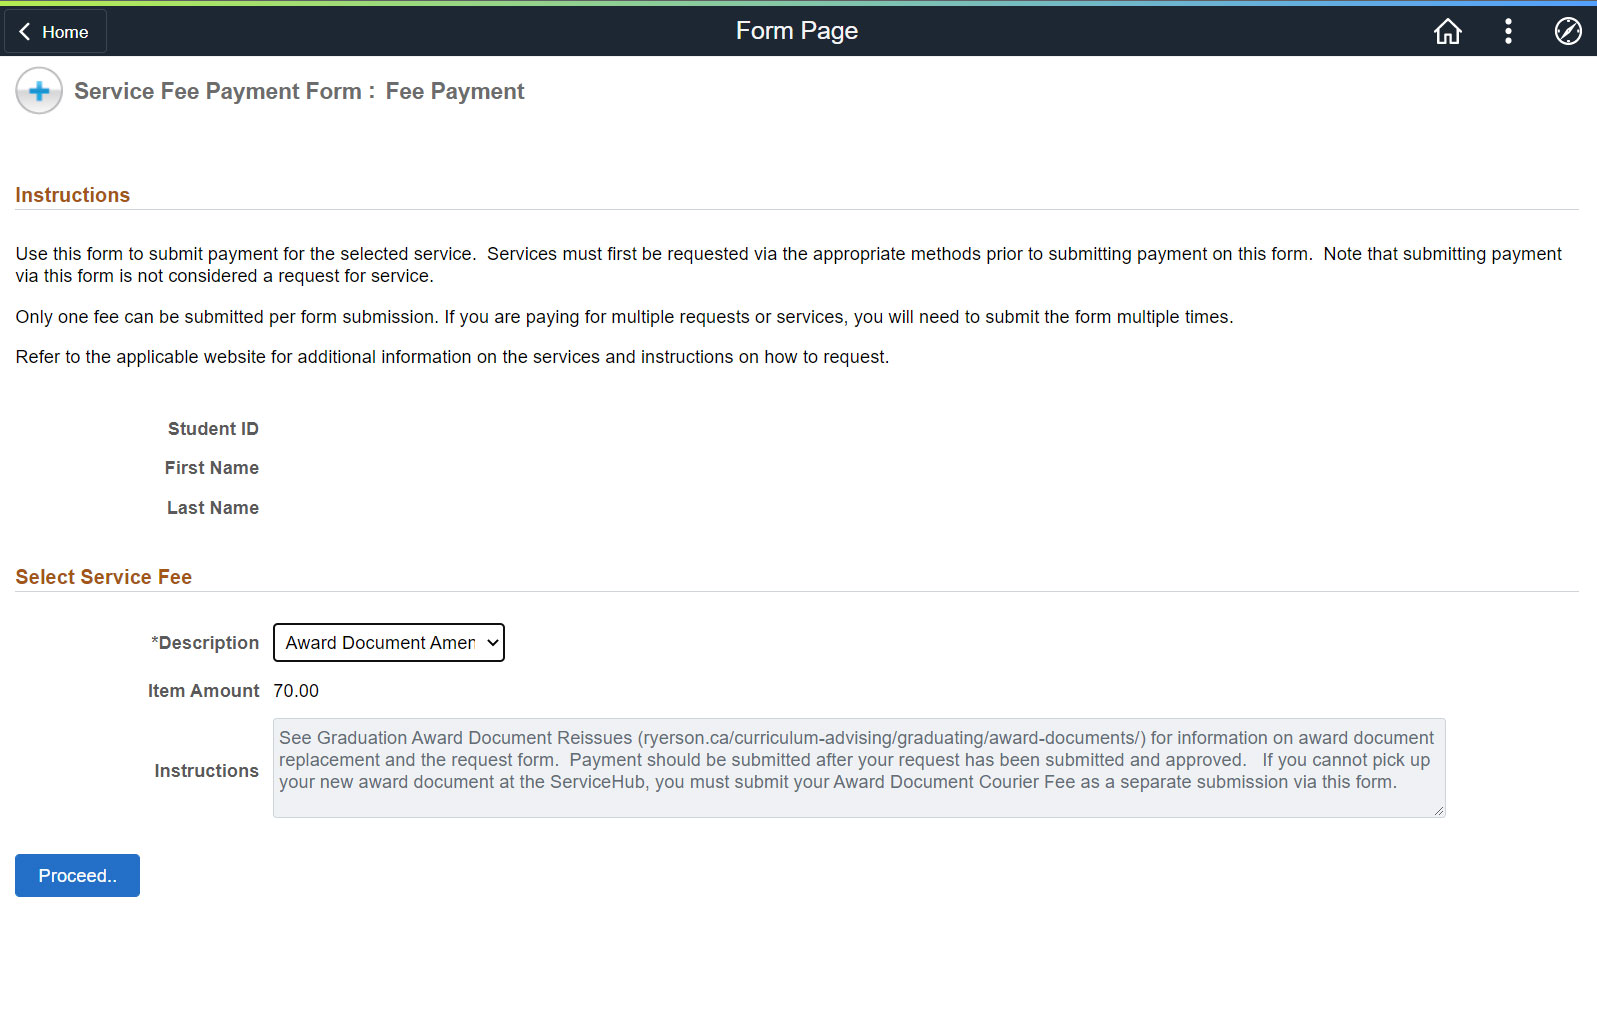 Service Fee Payment Form with completed Description, Item Amount and Insturctions sections